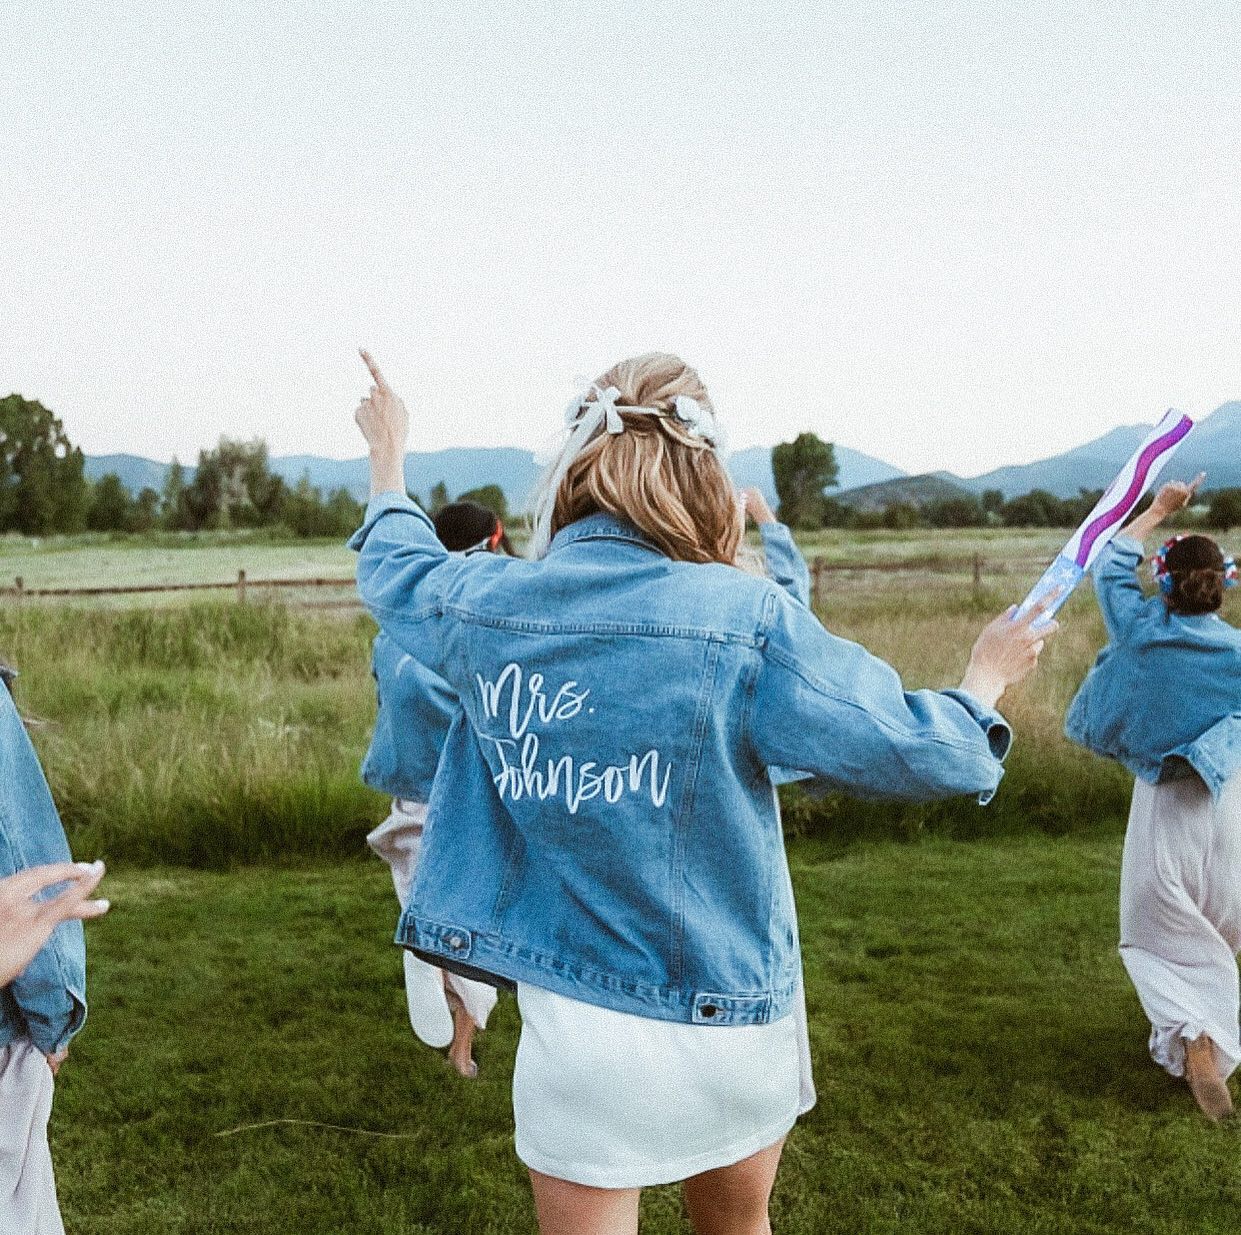 Complete Your Bridal Look With a Personalized Wedding Jacket | Minnesota  Bride